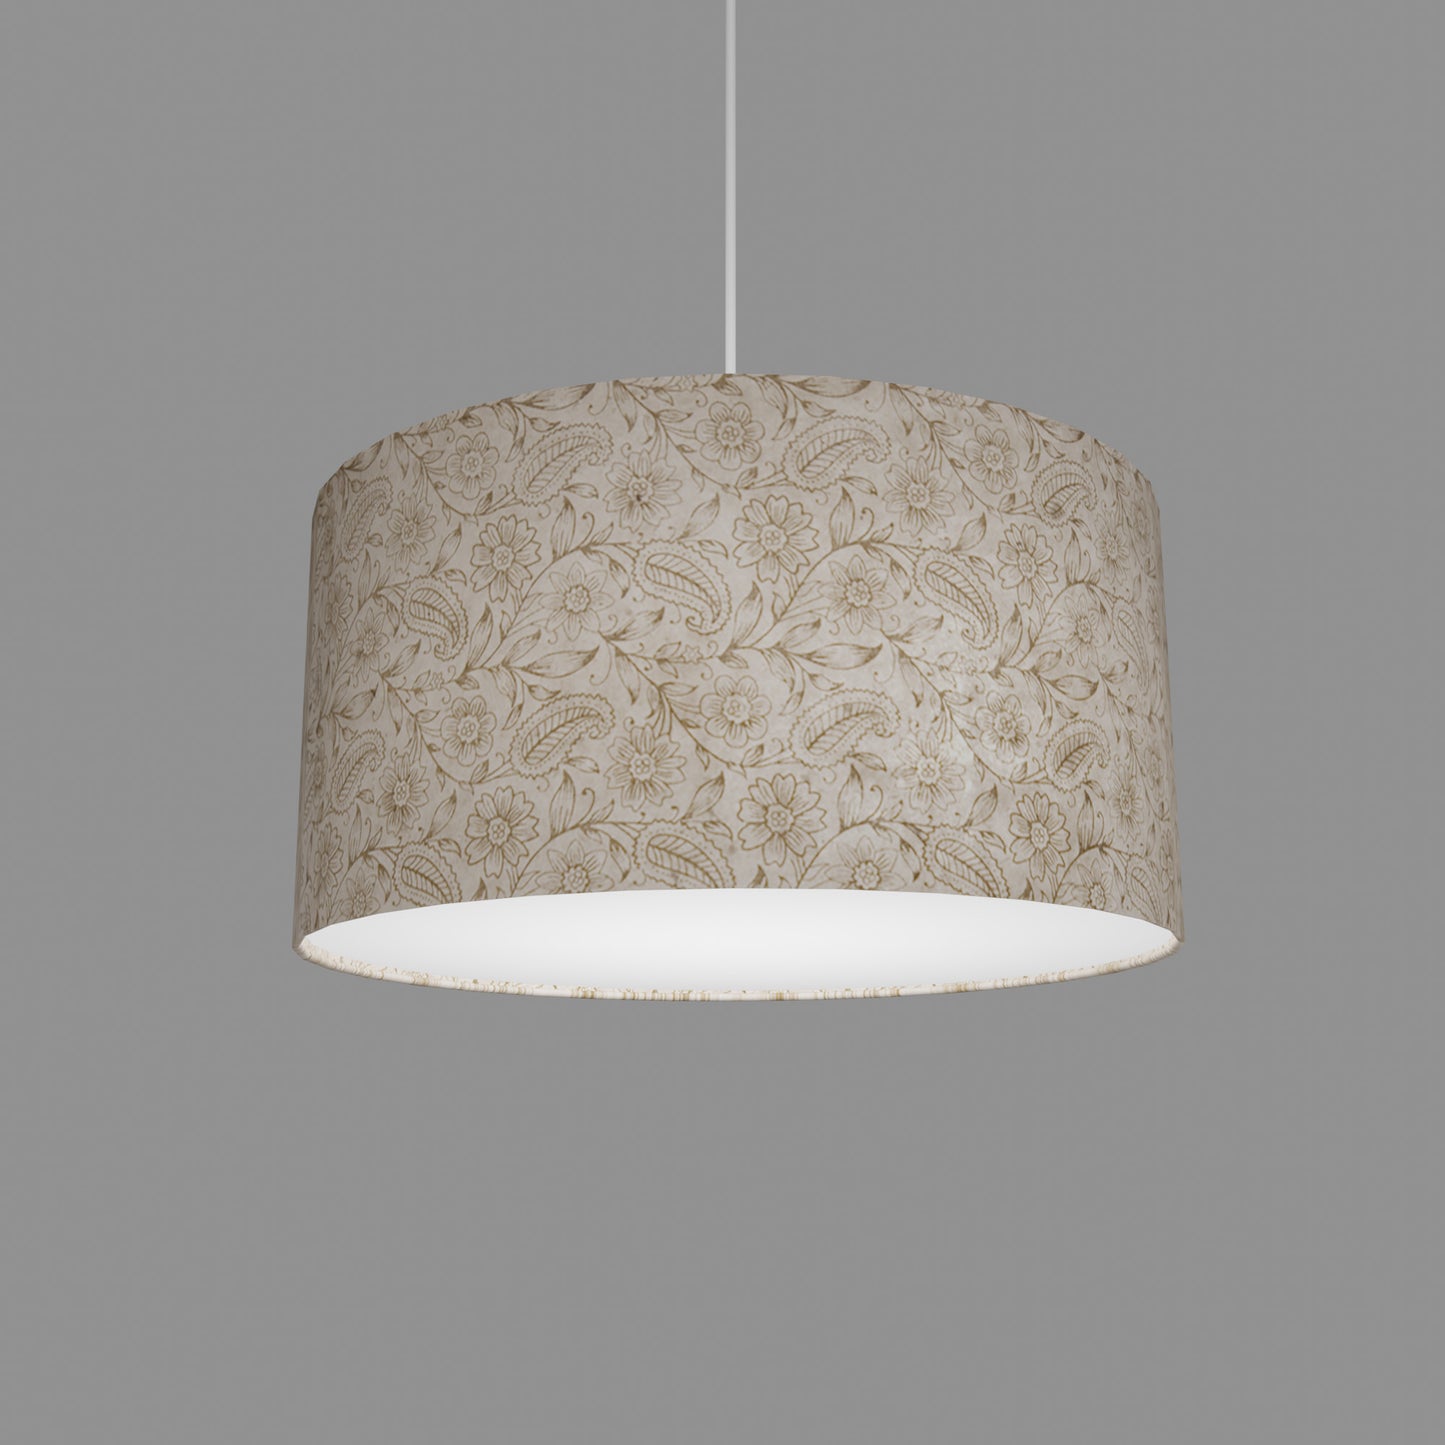 Drum Lamp Shade - P69 - Garden Gold on Natural, 40cm(d) x 20cm(h)